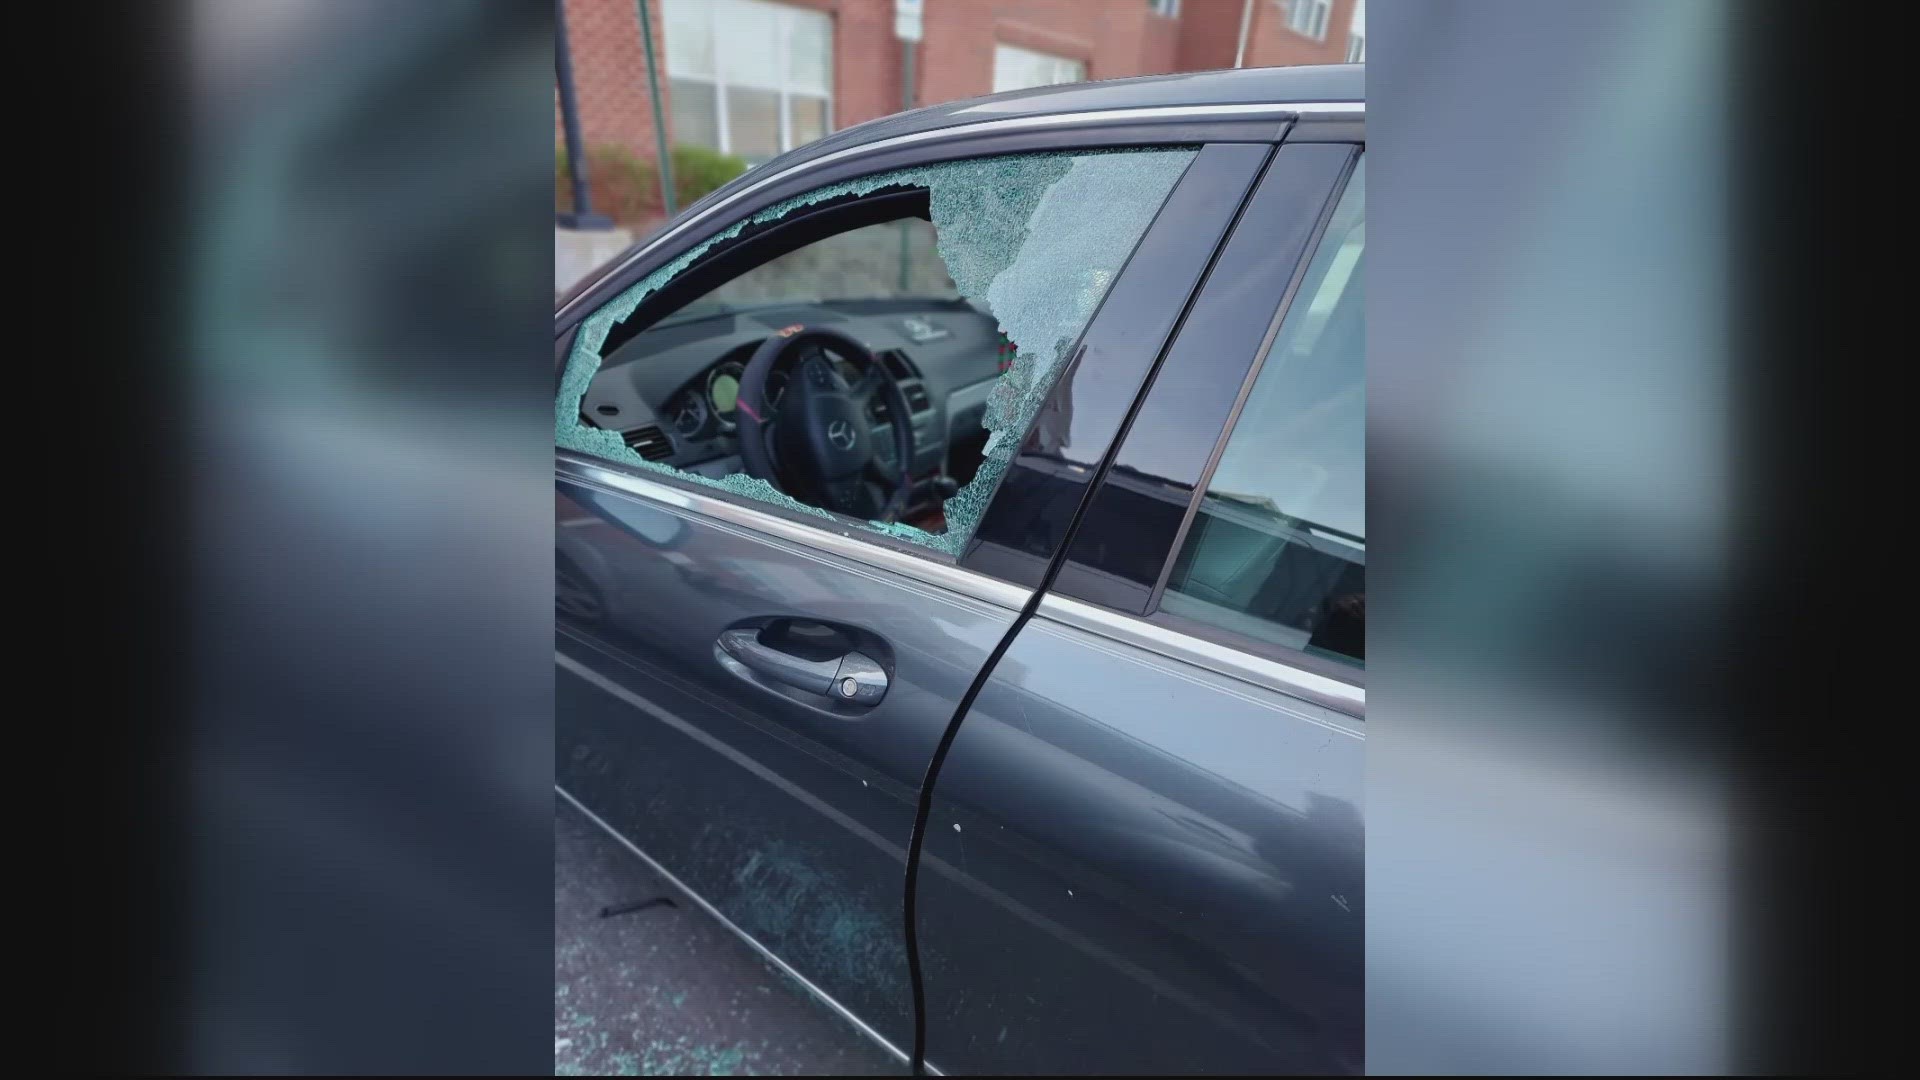 Seniors living at an apartment complex in Prince George's County say they're scared after multiple car break-ins.